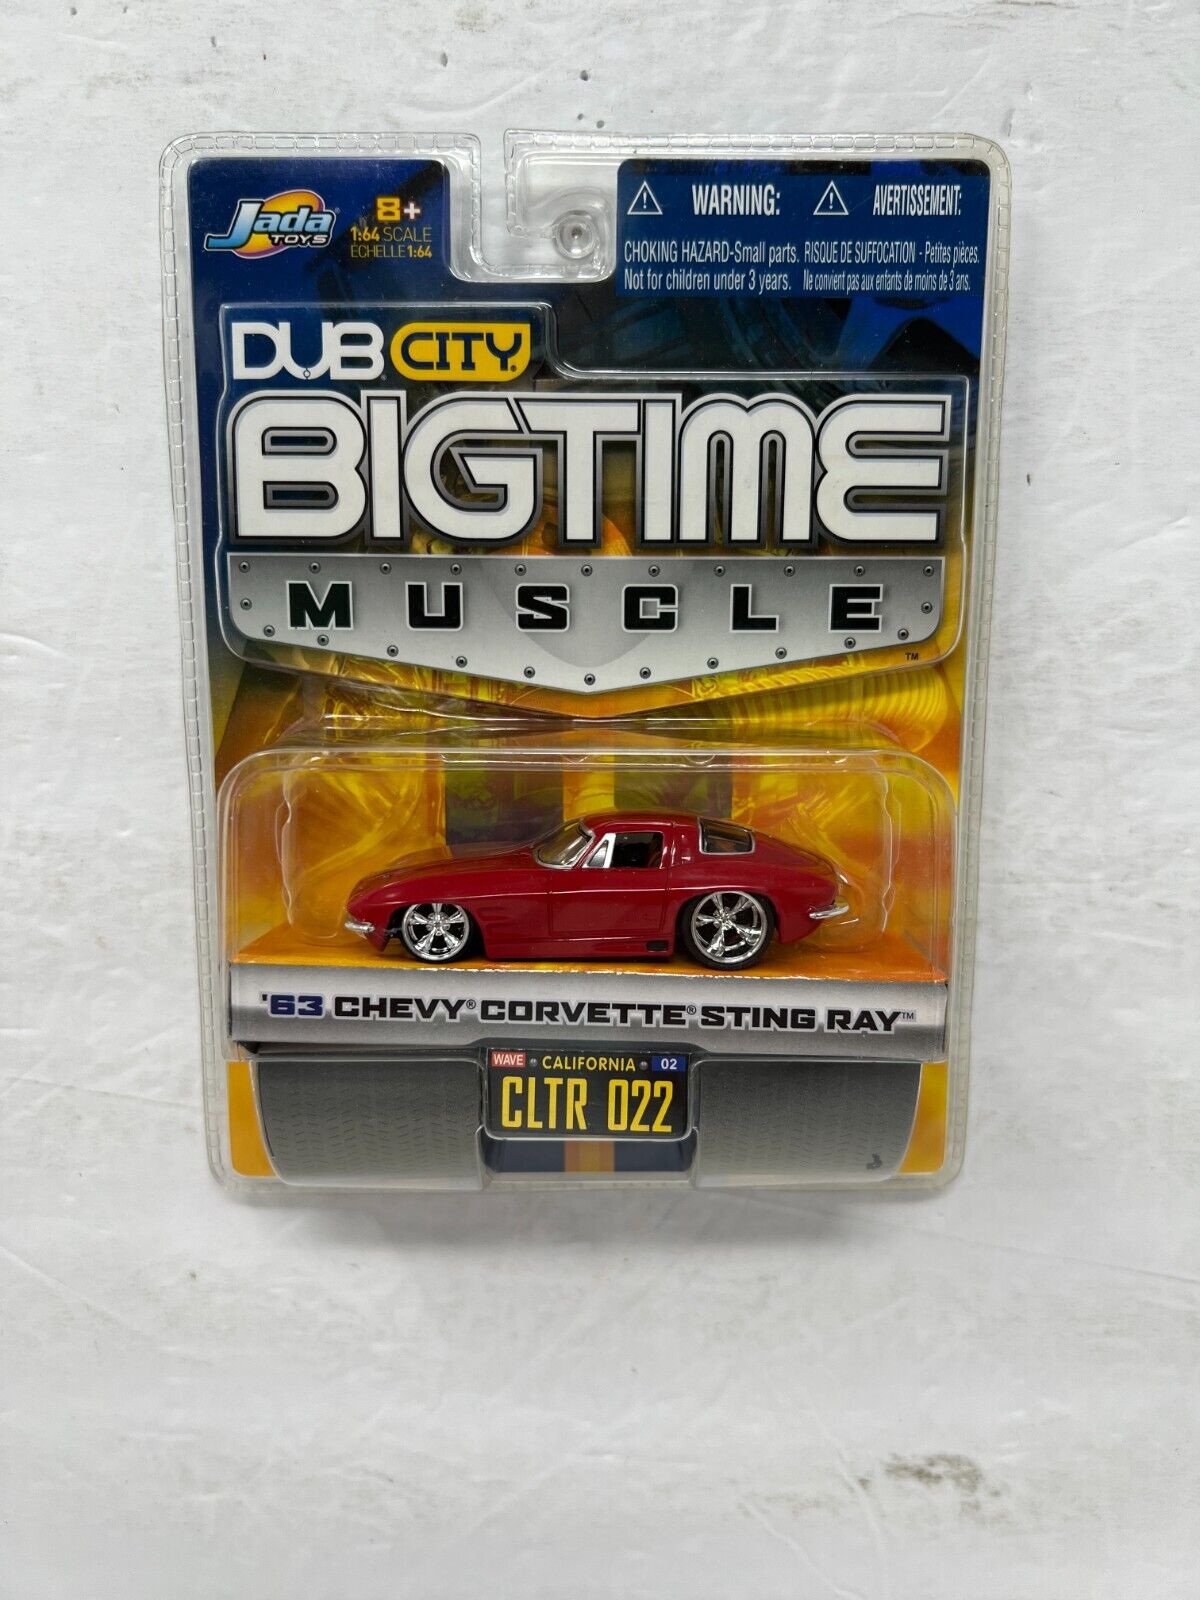 Jada Dub City Bigtime Muscle '63 Chevy Corvette Sting Ray 1:64 Diecast